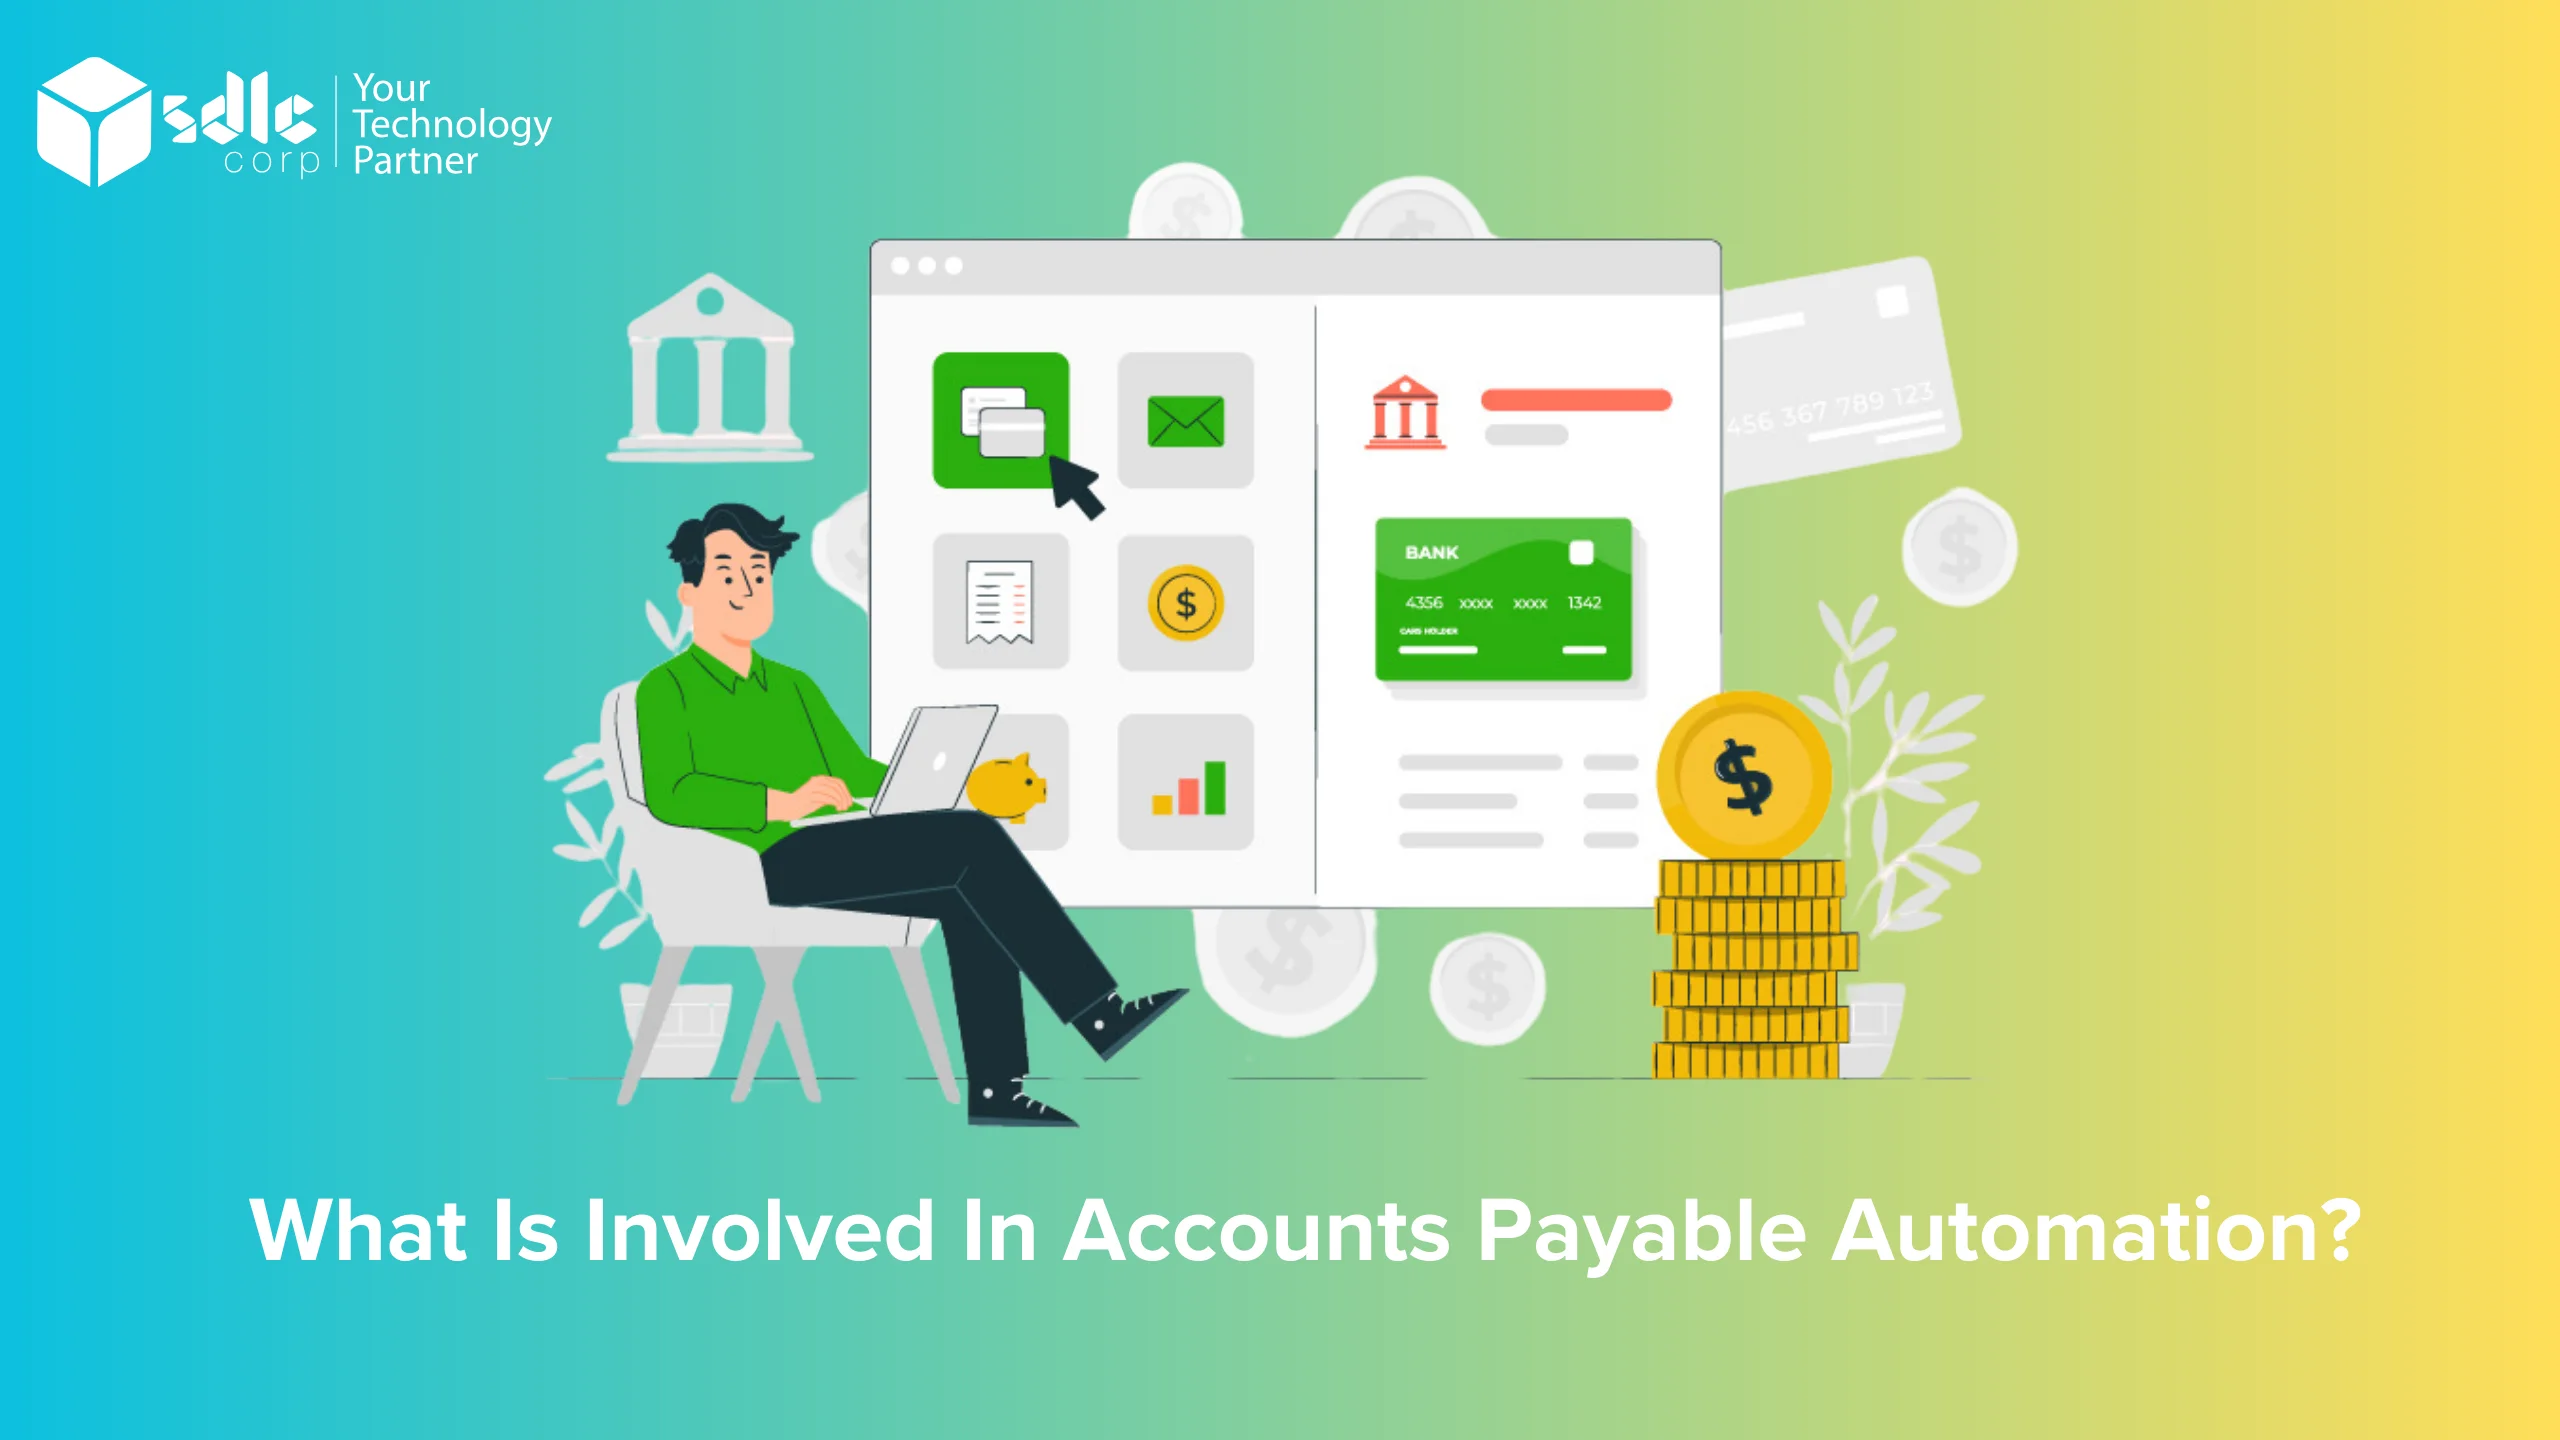 What Is Involved in Accounts Payable Automation